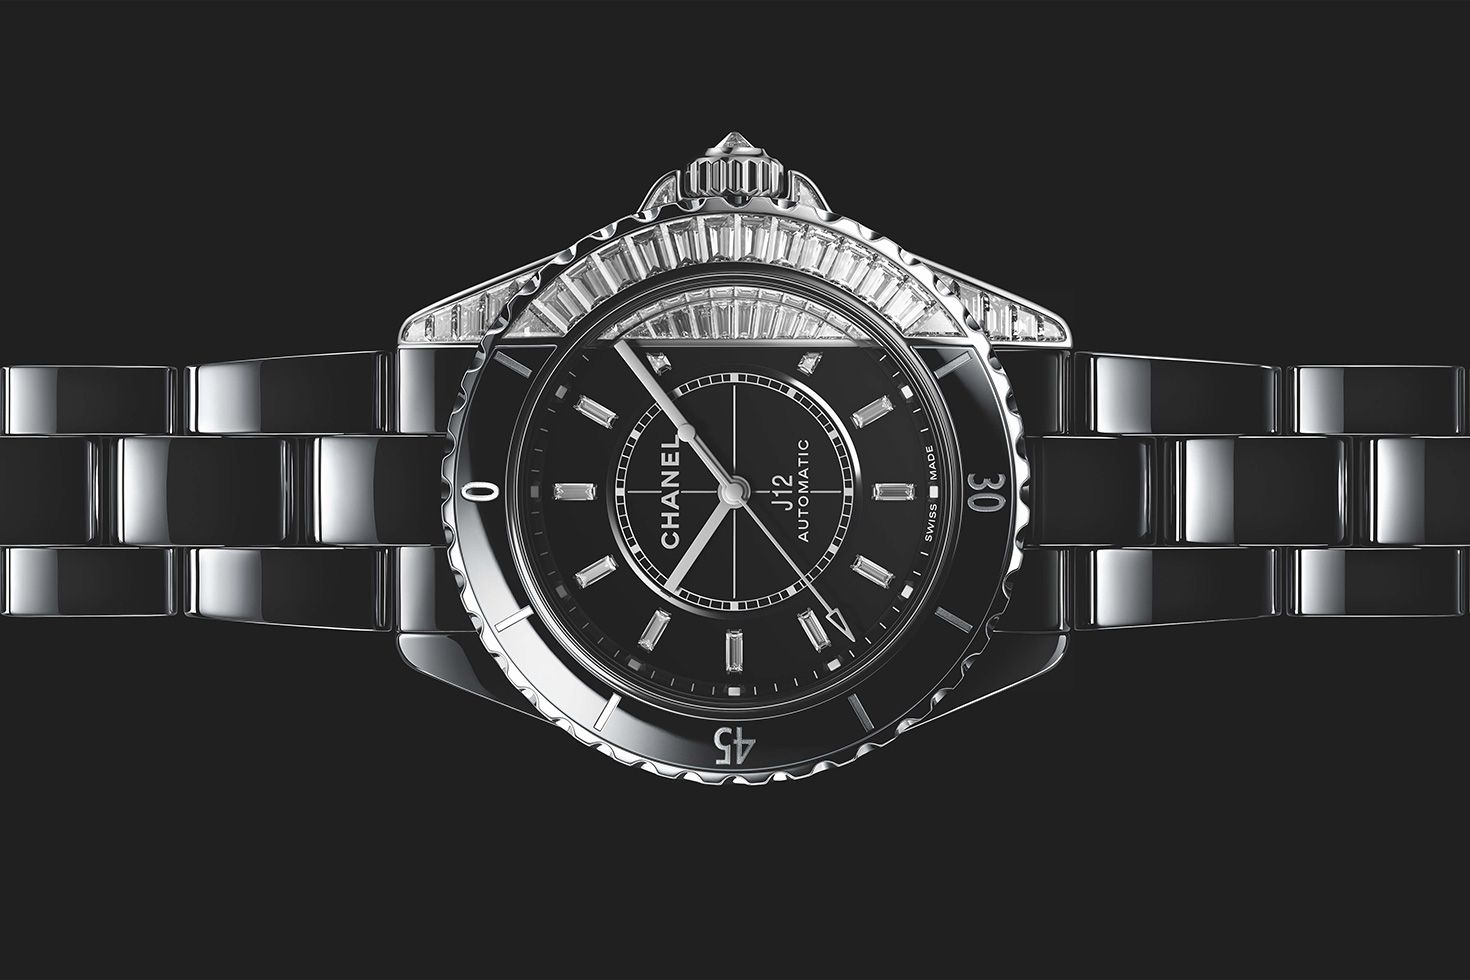 Chanel J12 Paradoxe Watch - BAGAHOLICBOY